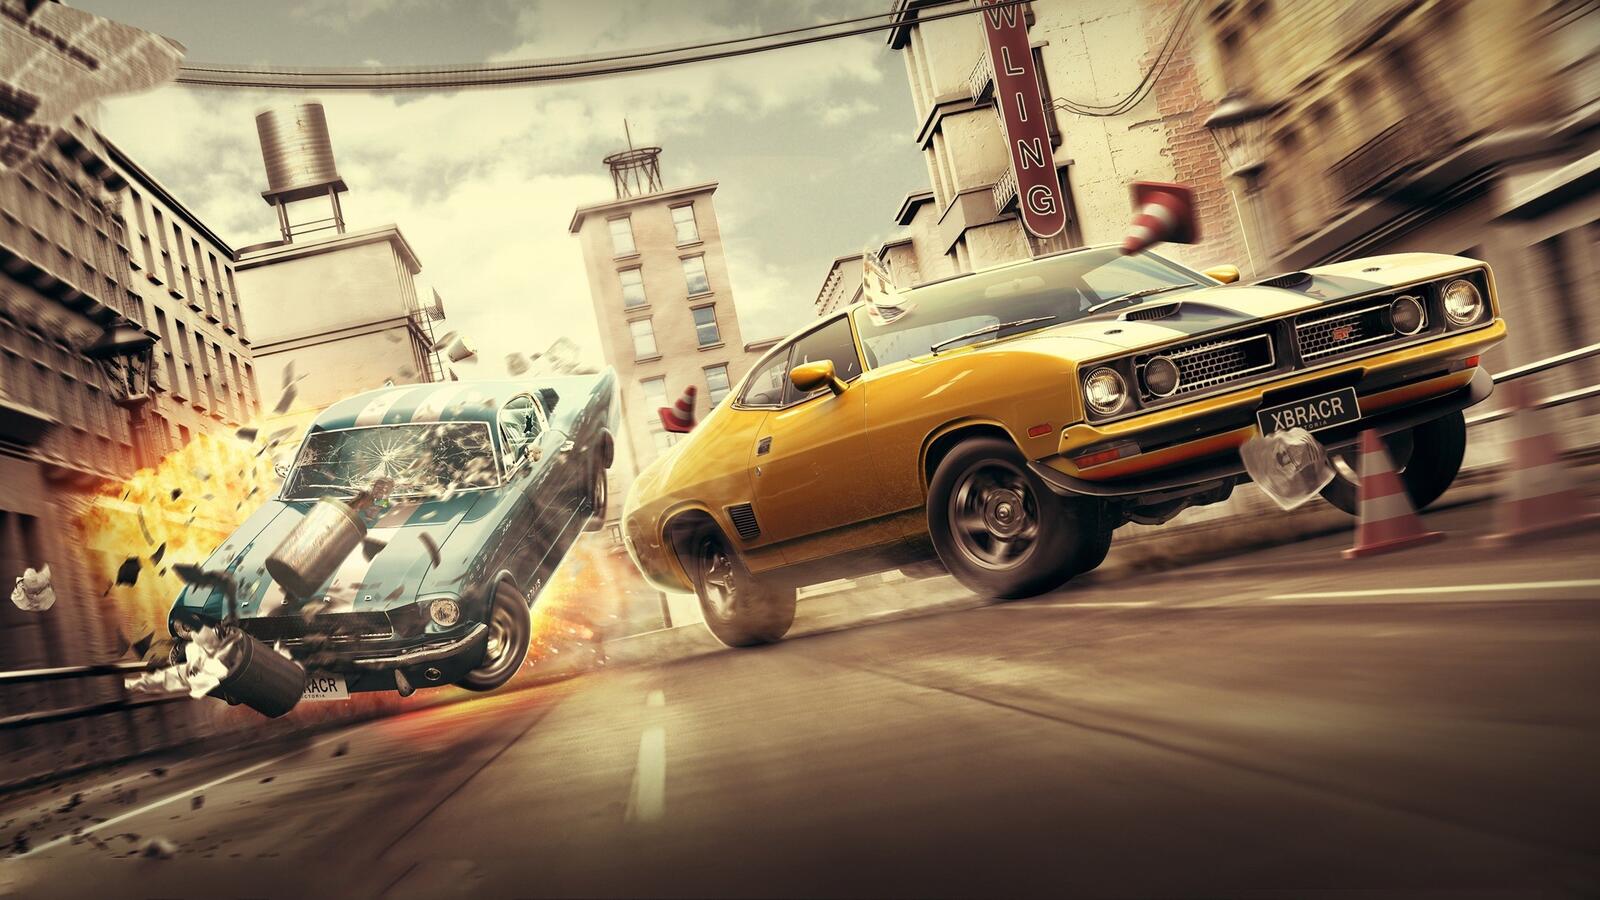 Wallpapers cars race city on the desktop